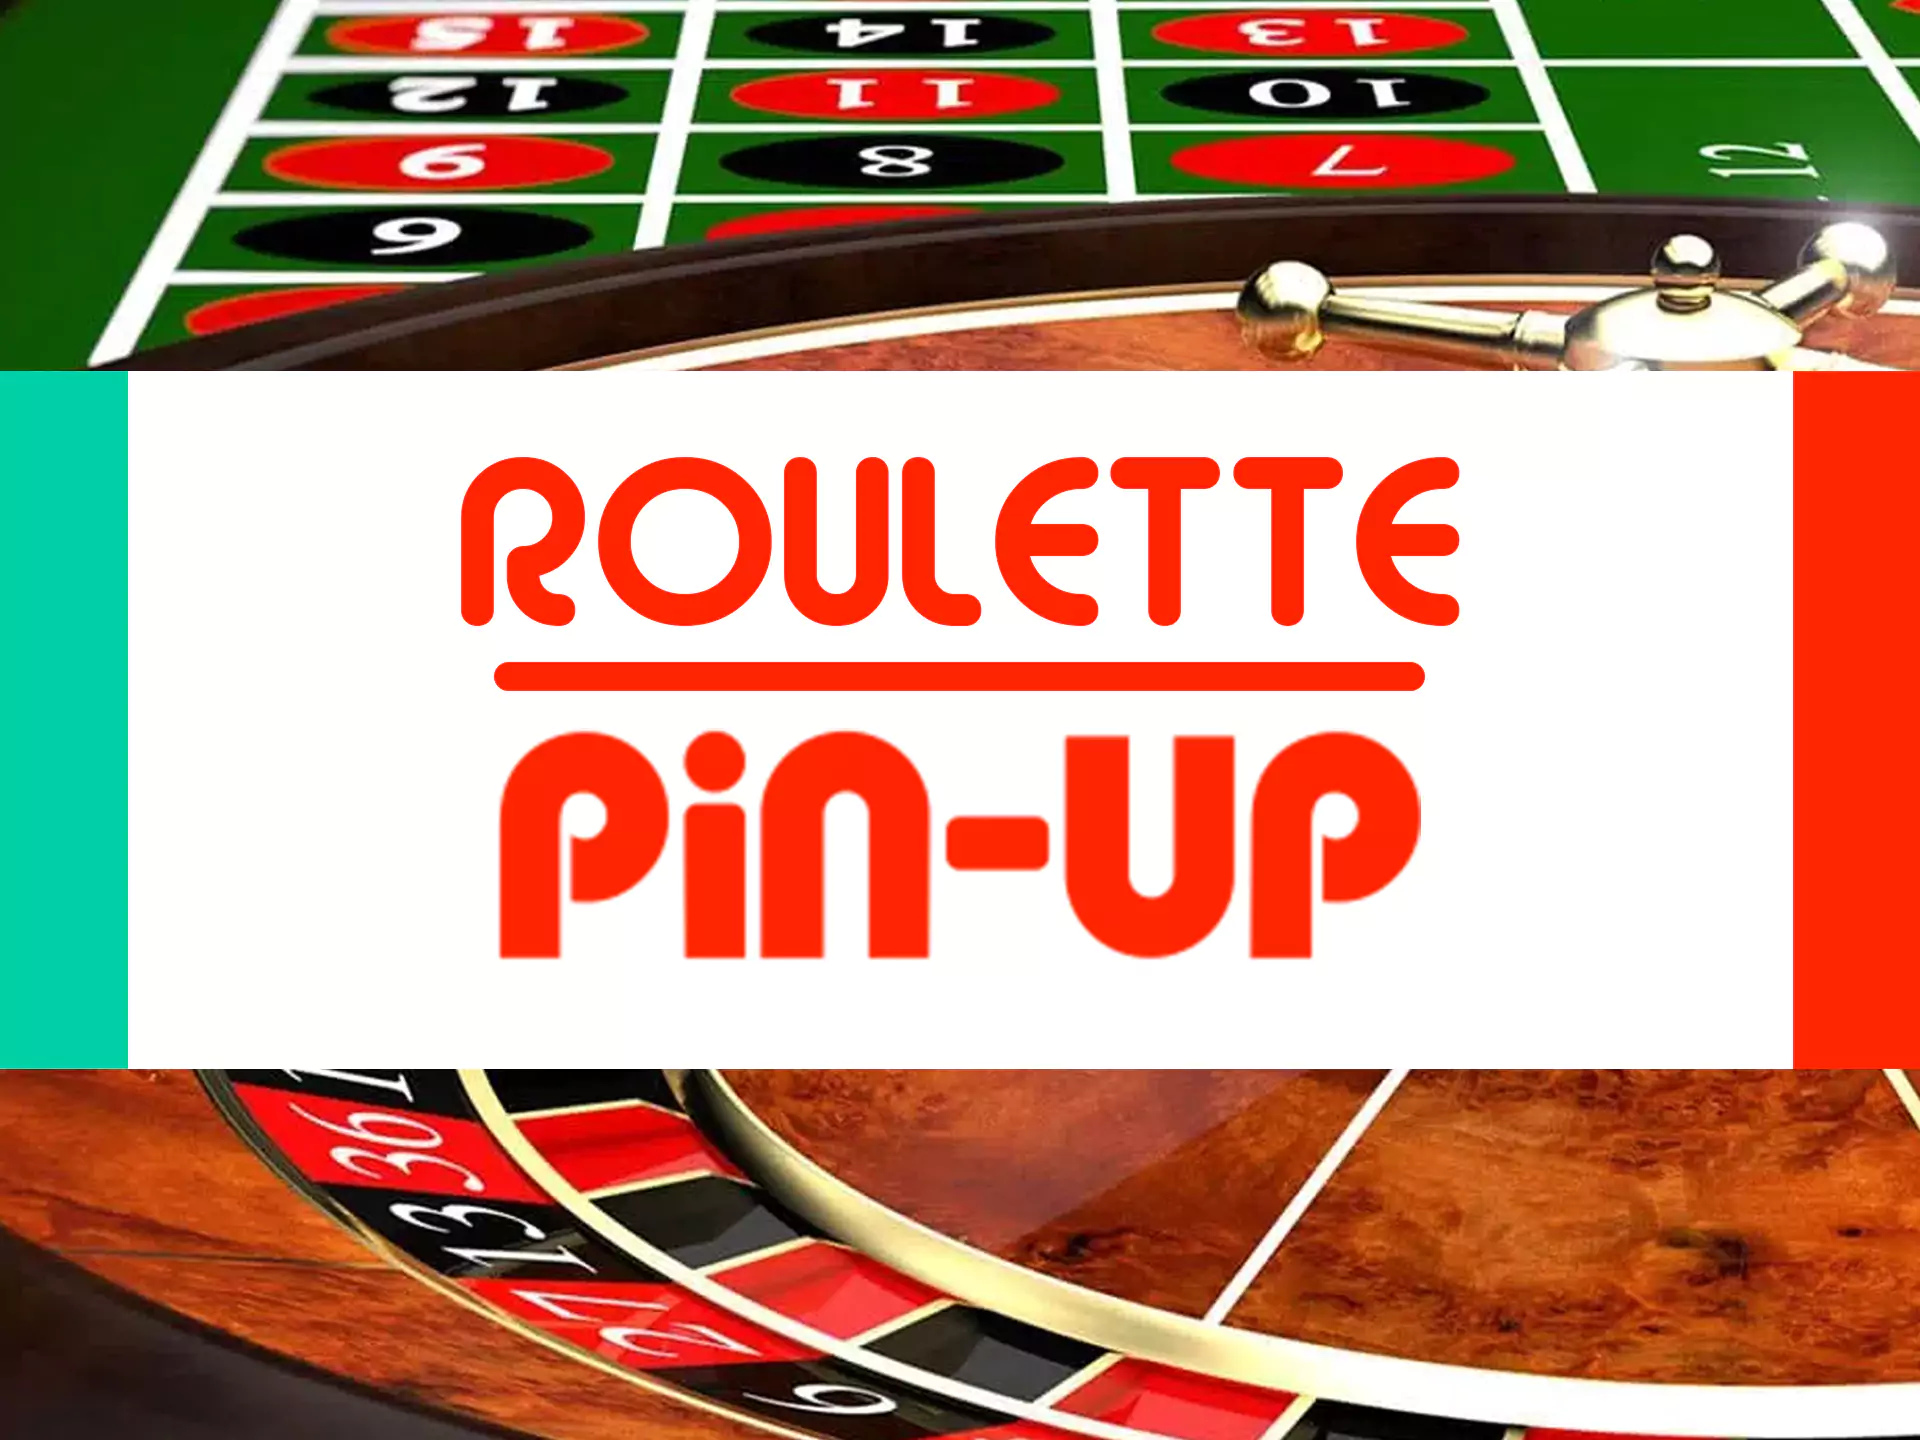 You can also play roulettes in the app.